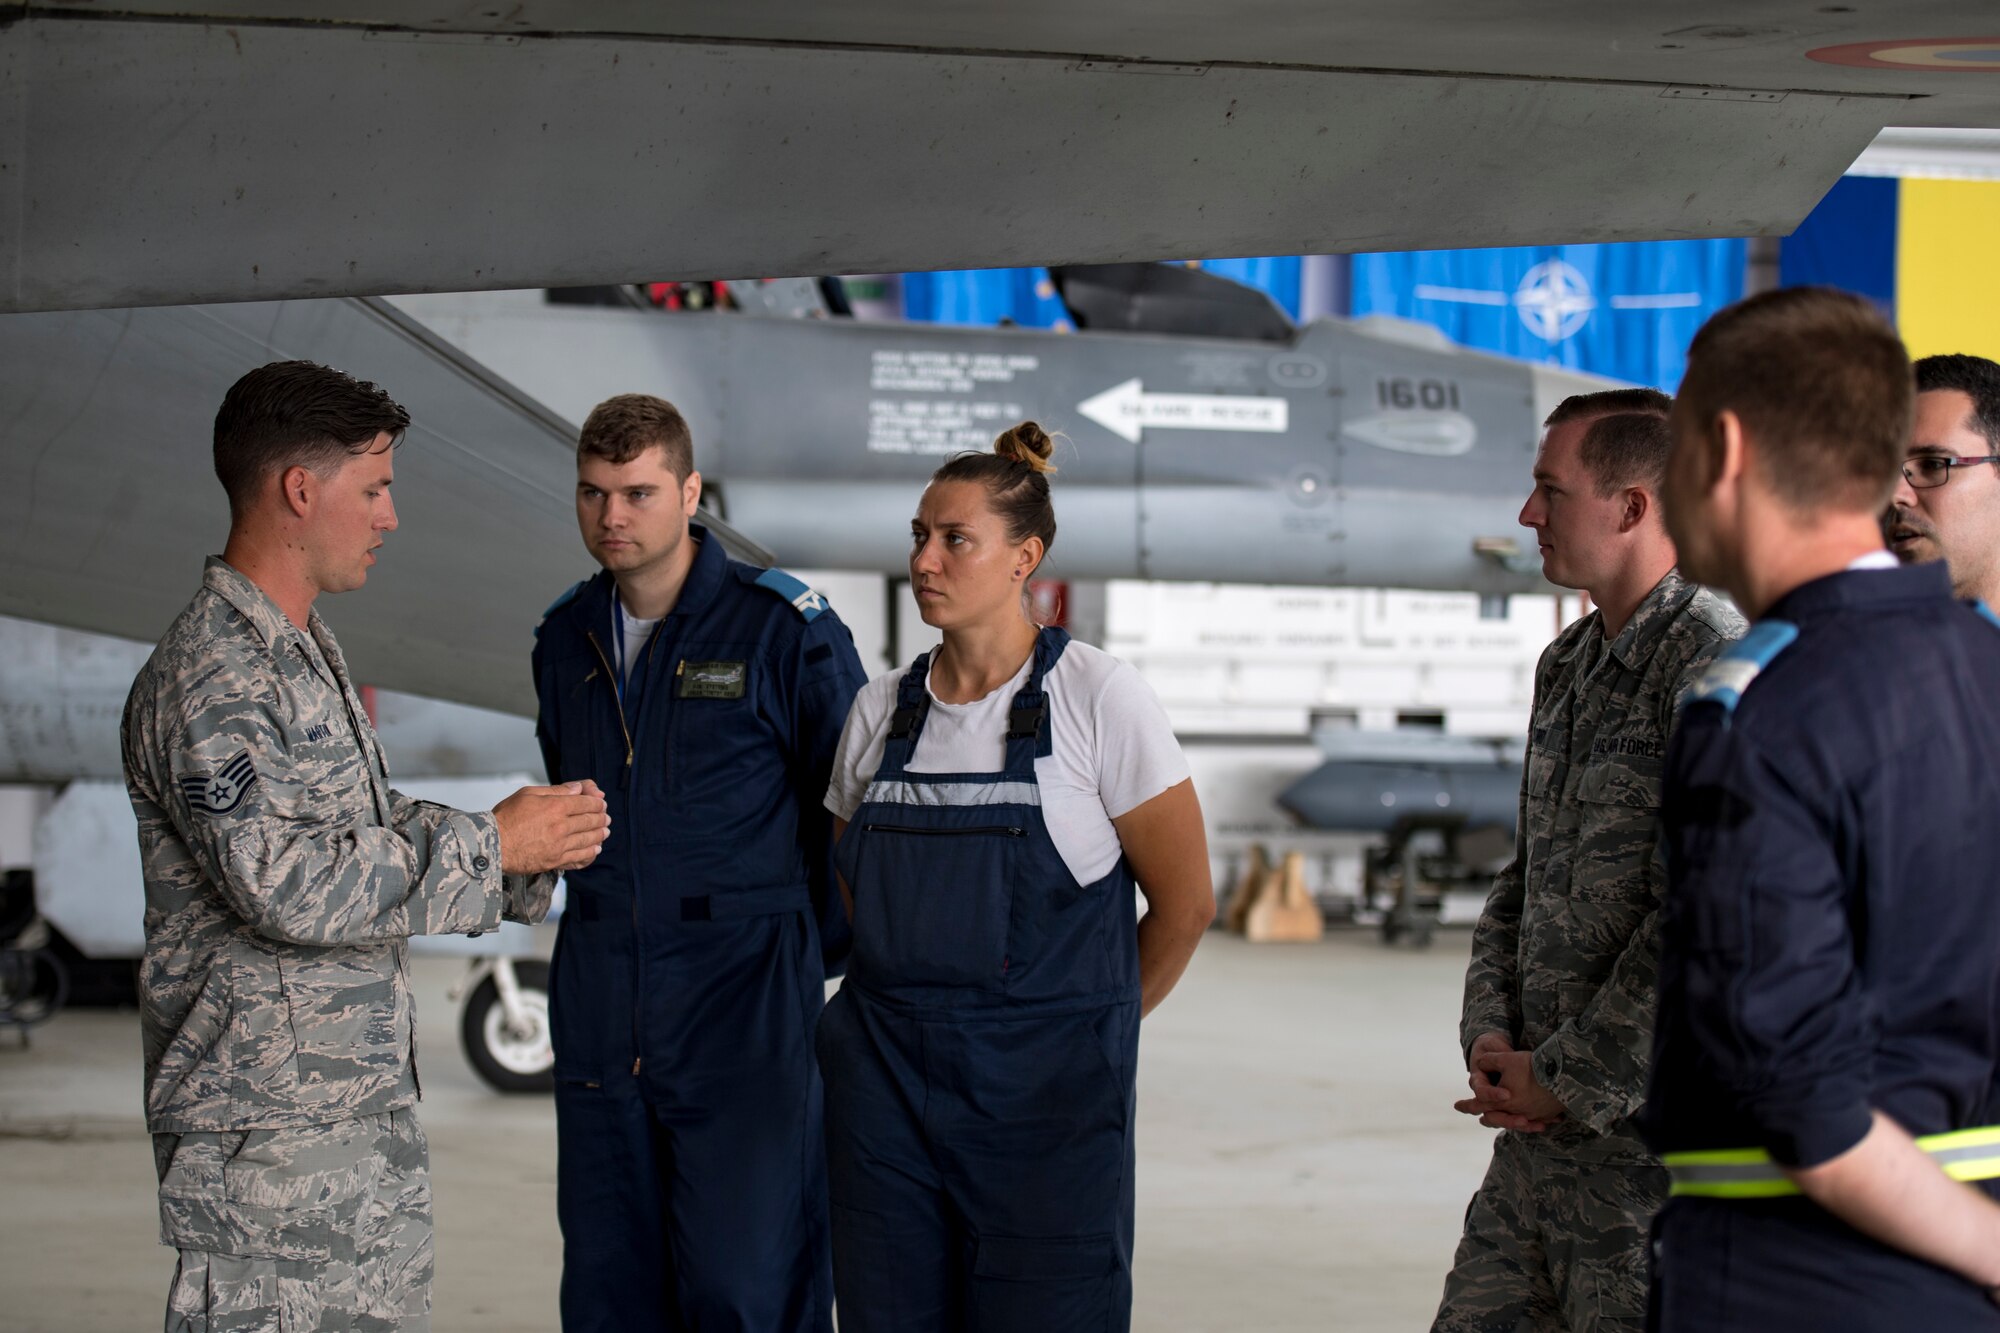 U.S. Air Force Staff Sgt. Johnathan Martin, 31st Maintenance Squadron electrical and environmental craftsman, discusses aircraft maintenance with Romanian air force personnel at Borcea Air Base, Romania, July 25, 2018. Martin traveled from Aviano Air Base, Italy, to support the 435th Contingency Response Support Squadron from Ramstein Air Base, Germany, with providing training to the Romanian air force. (U.S. Air Force photo by Senior Airman Devin Boyer)